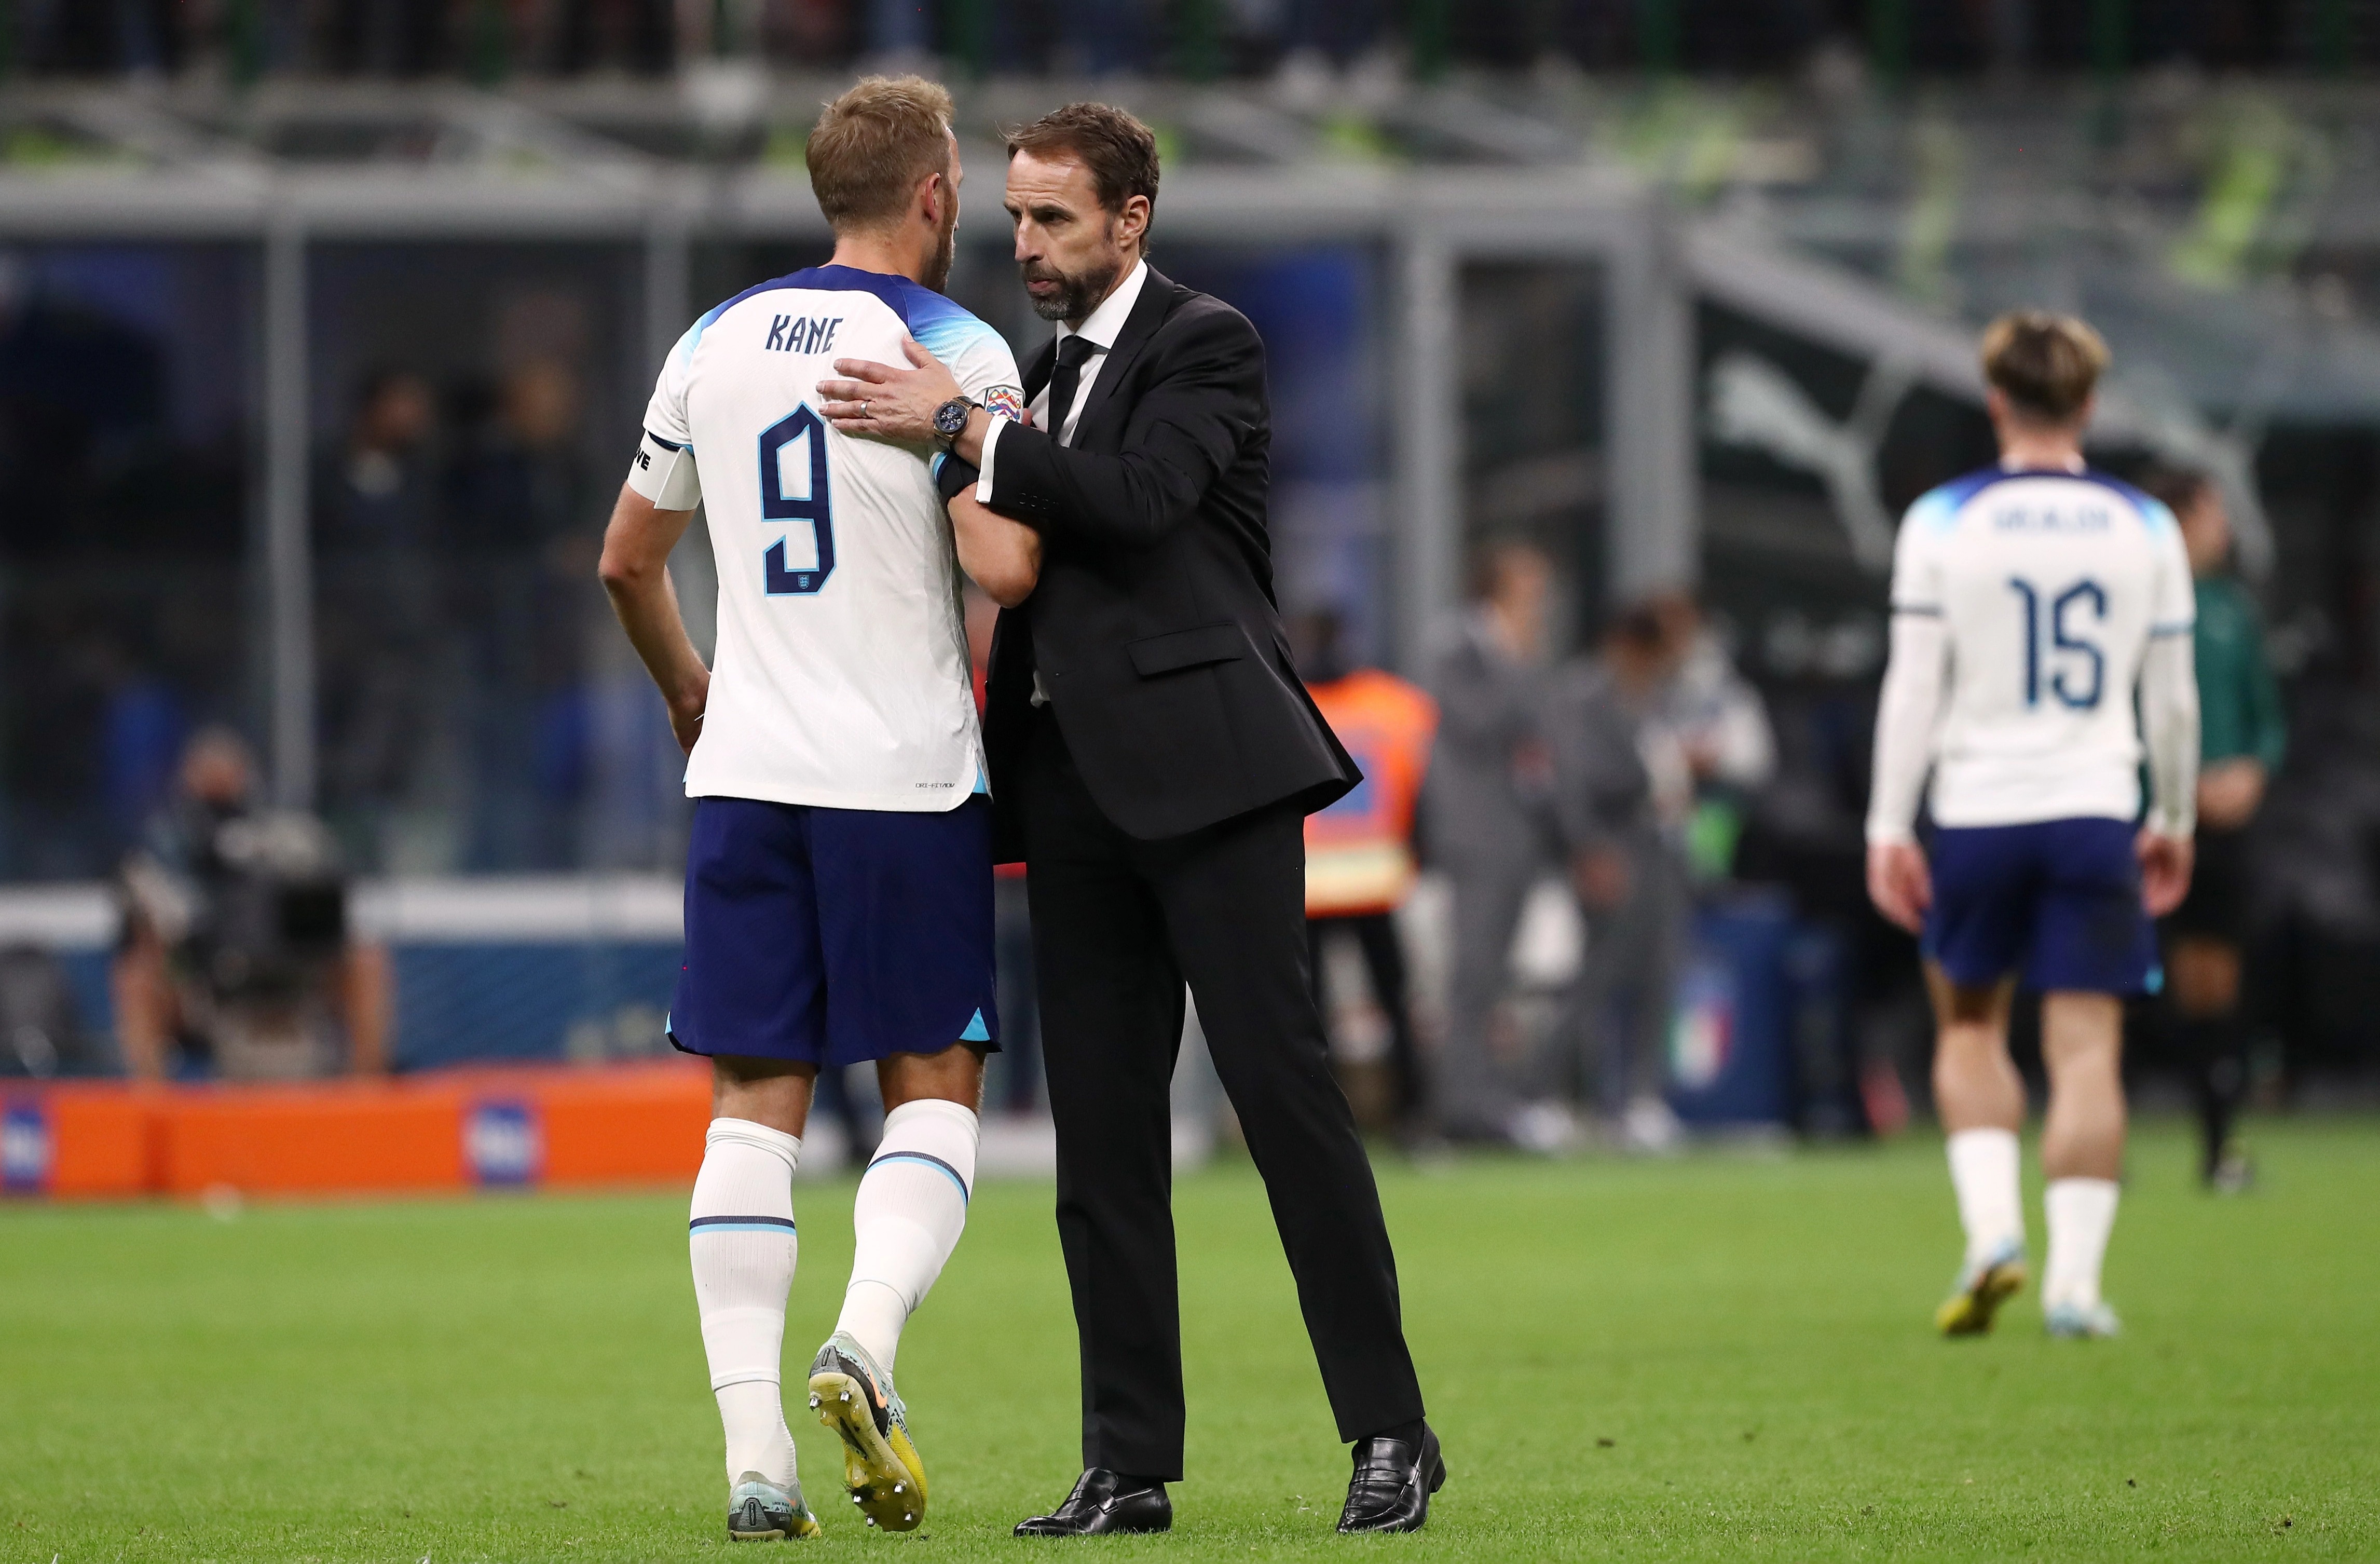 England have not won in five matches following their loss to Italy